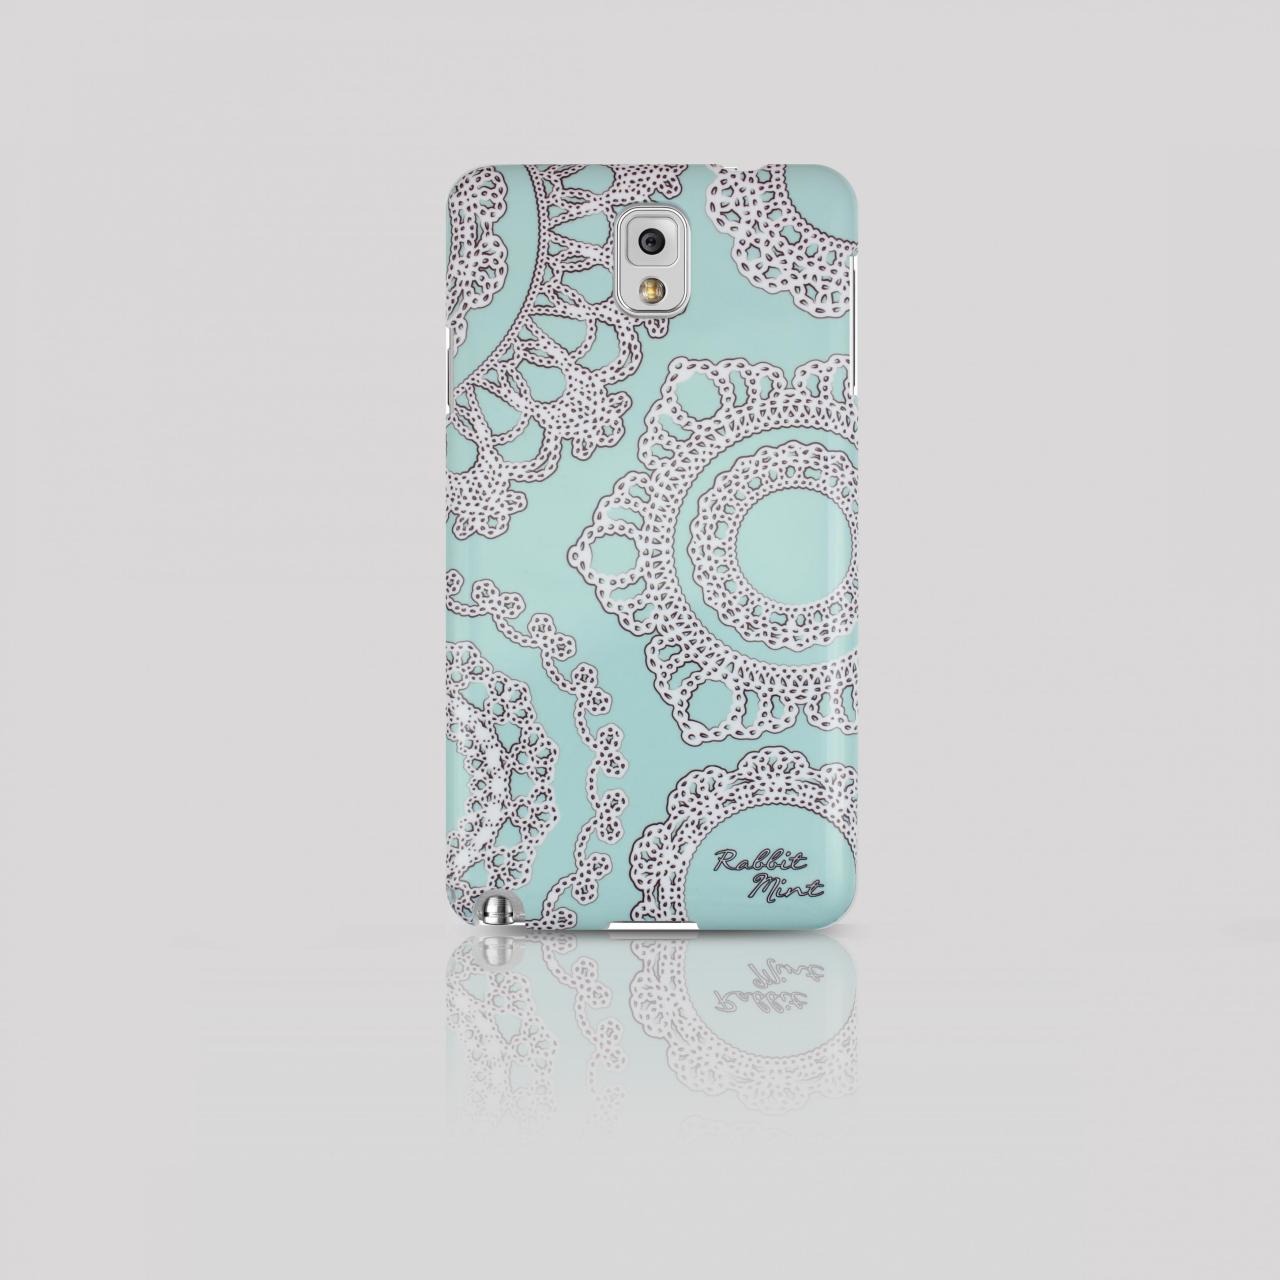 Samsung Galaxy Note 3 Case - Lace & Mint (00006-n3)